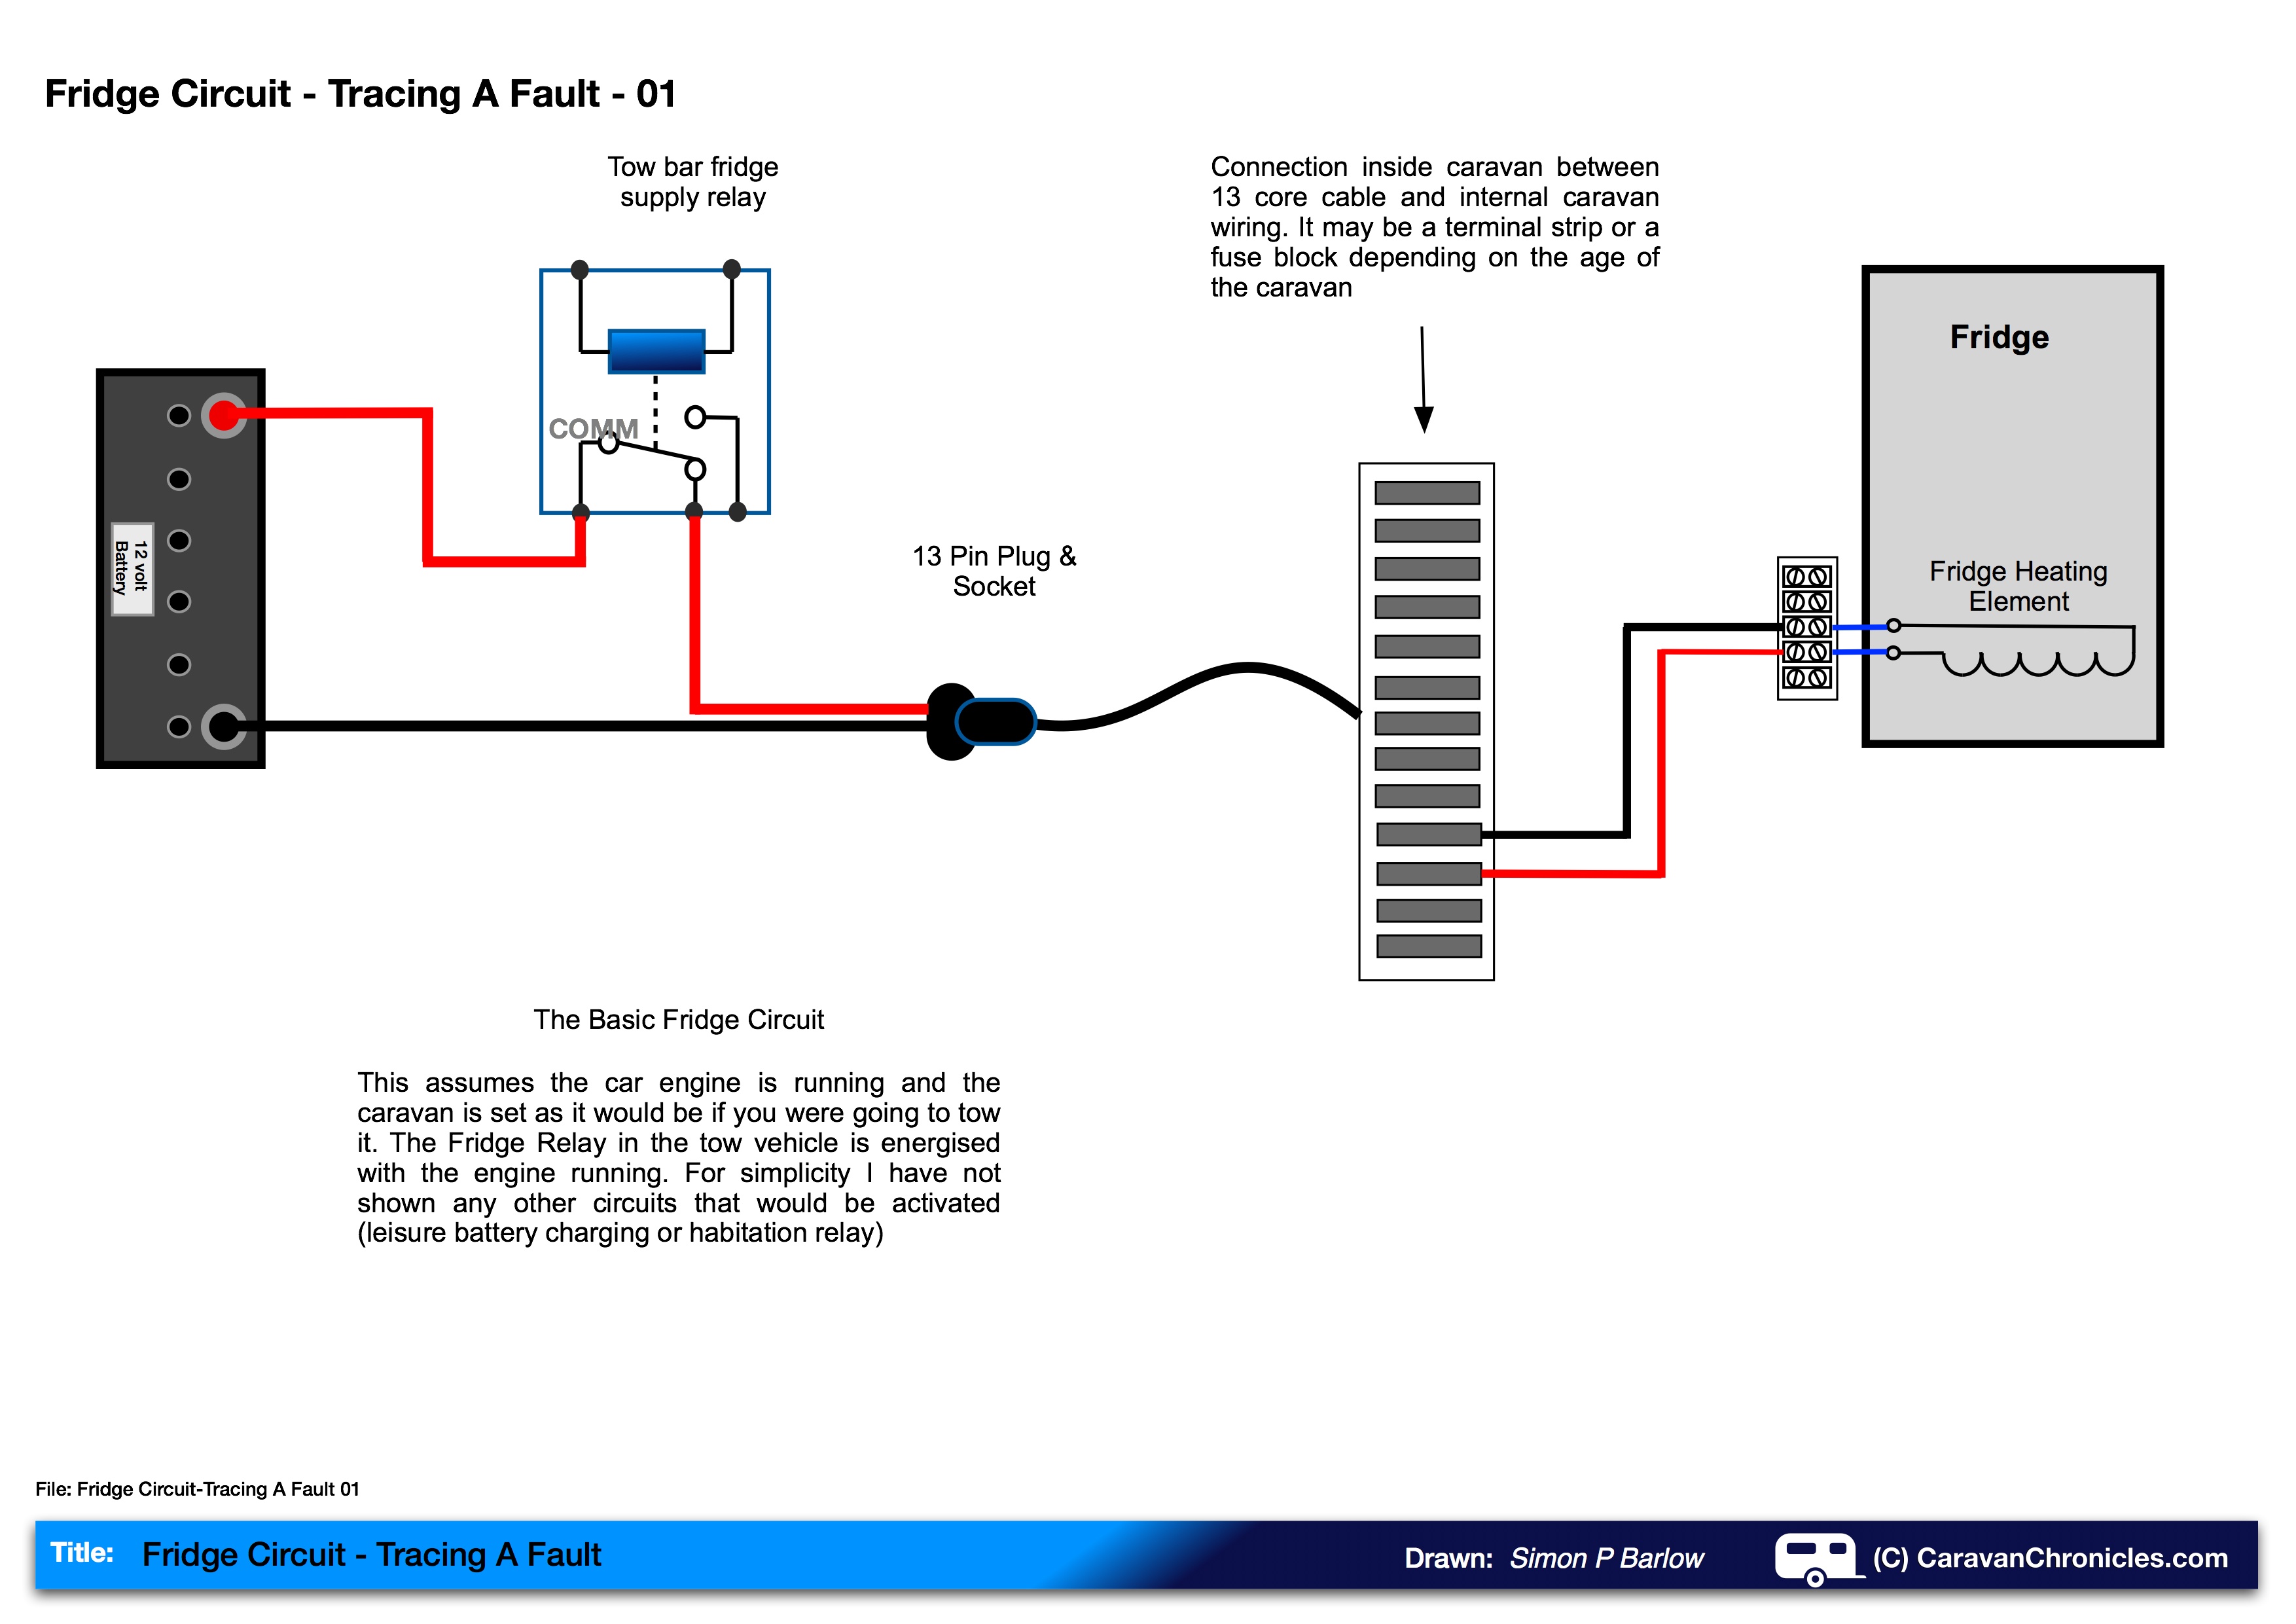 trace dr3624 internal wiring diagram